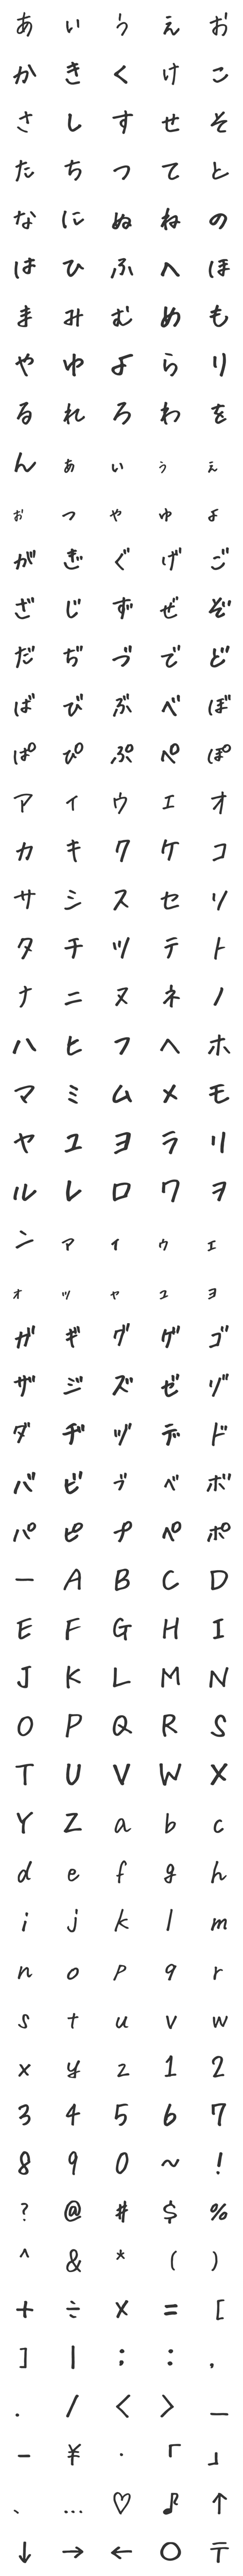 [LINE絵文字]ゆる手書き文字の画像一覧